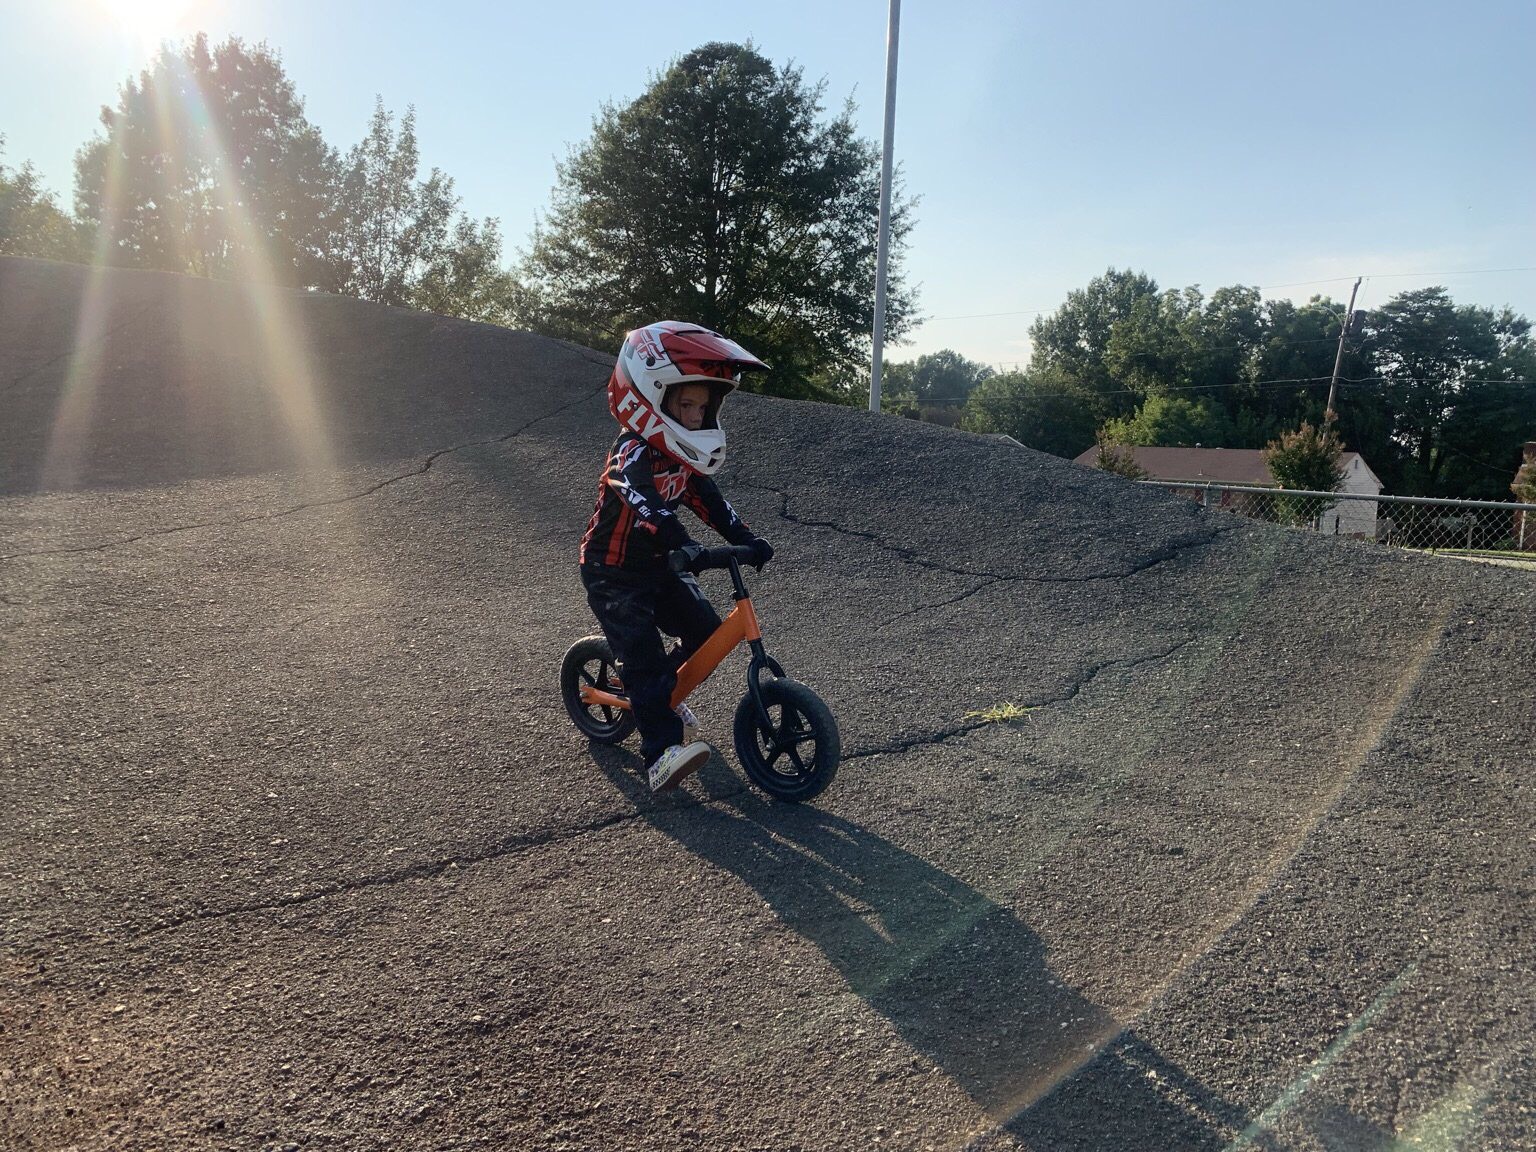 Quest Student is competing in BMX